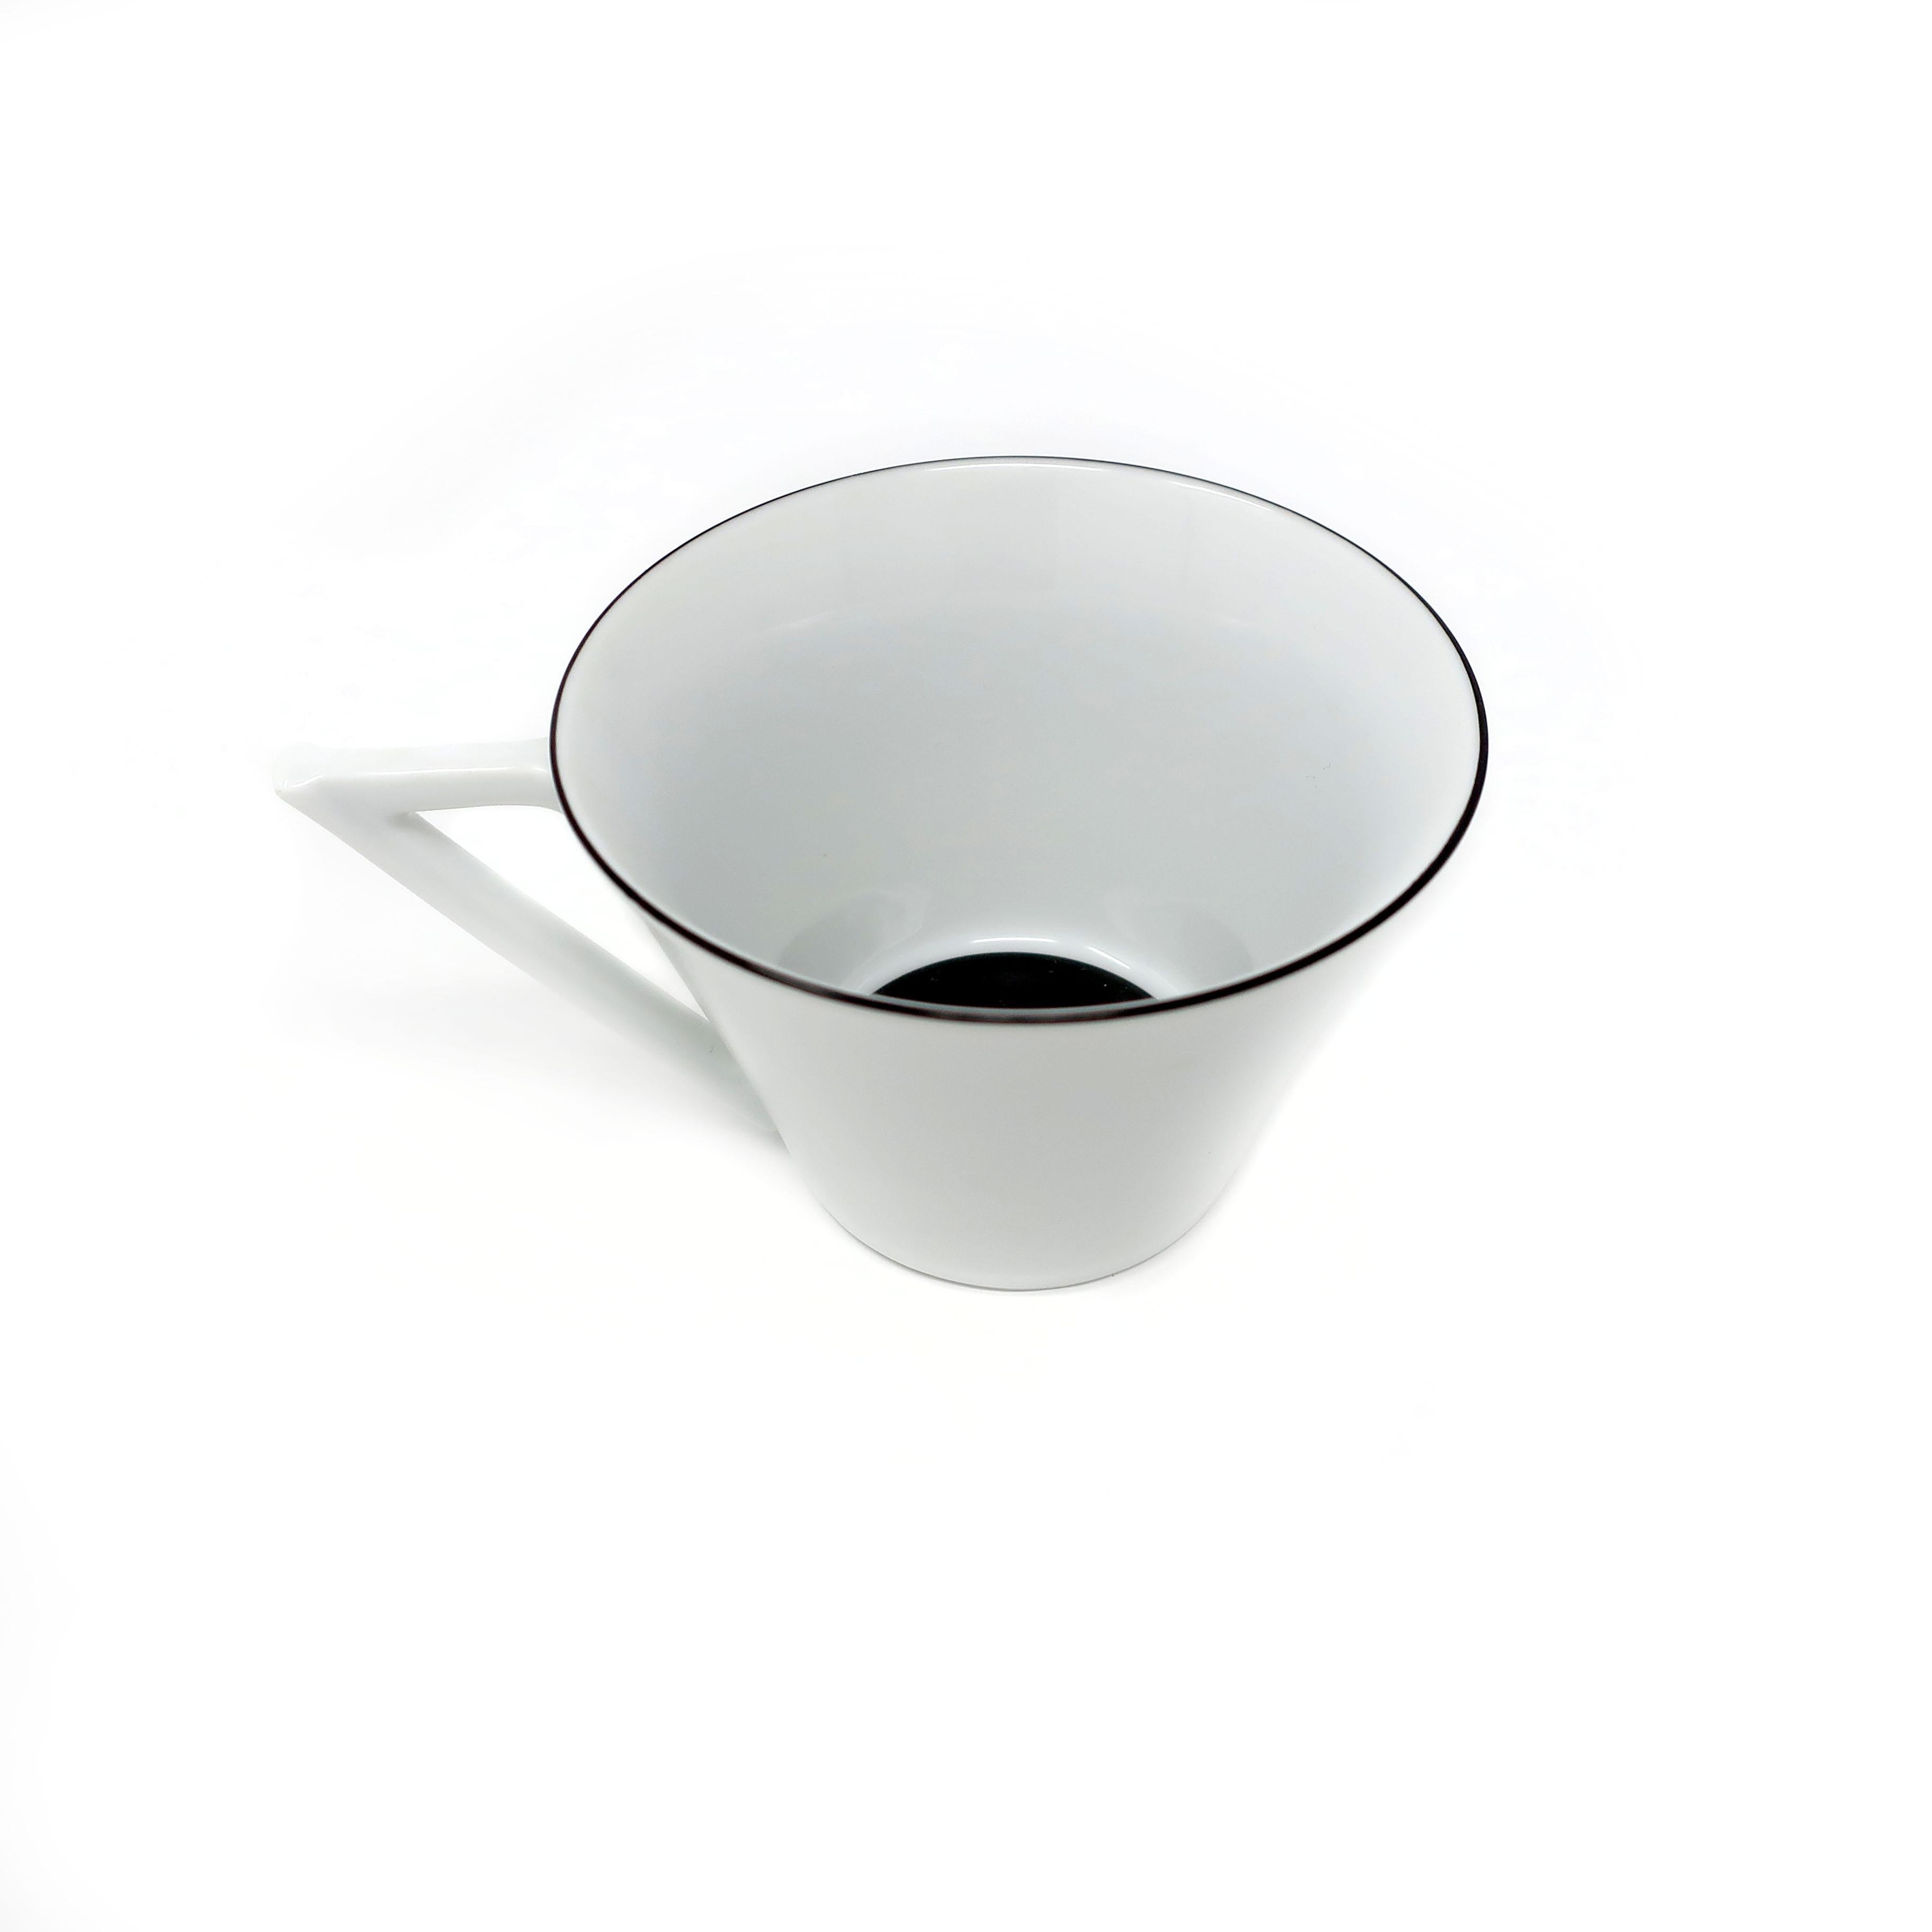 Andree Putman for Sasaki Cups and Saucers 2